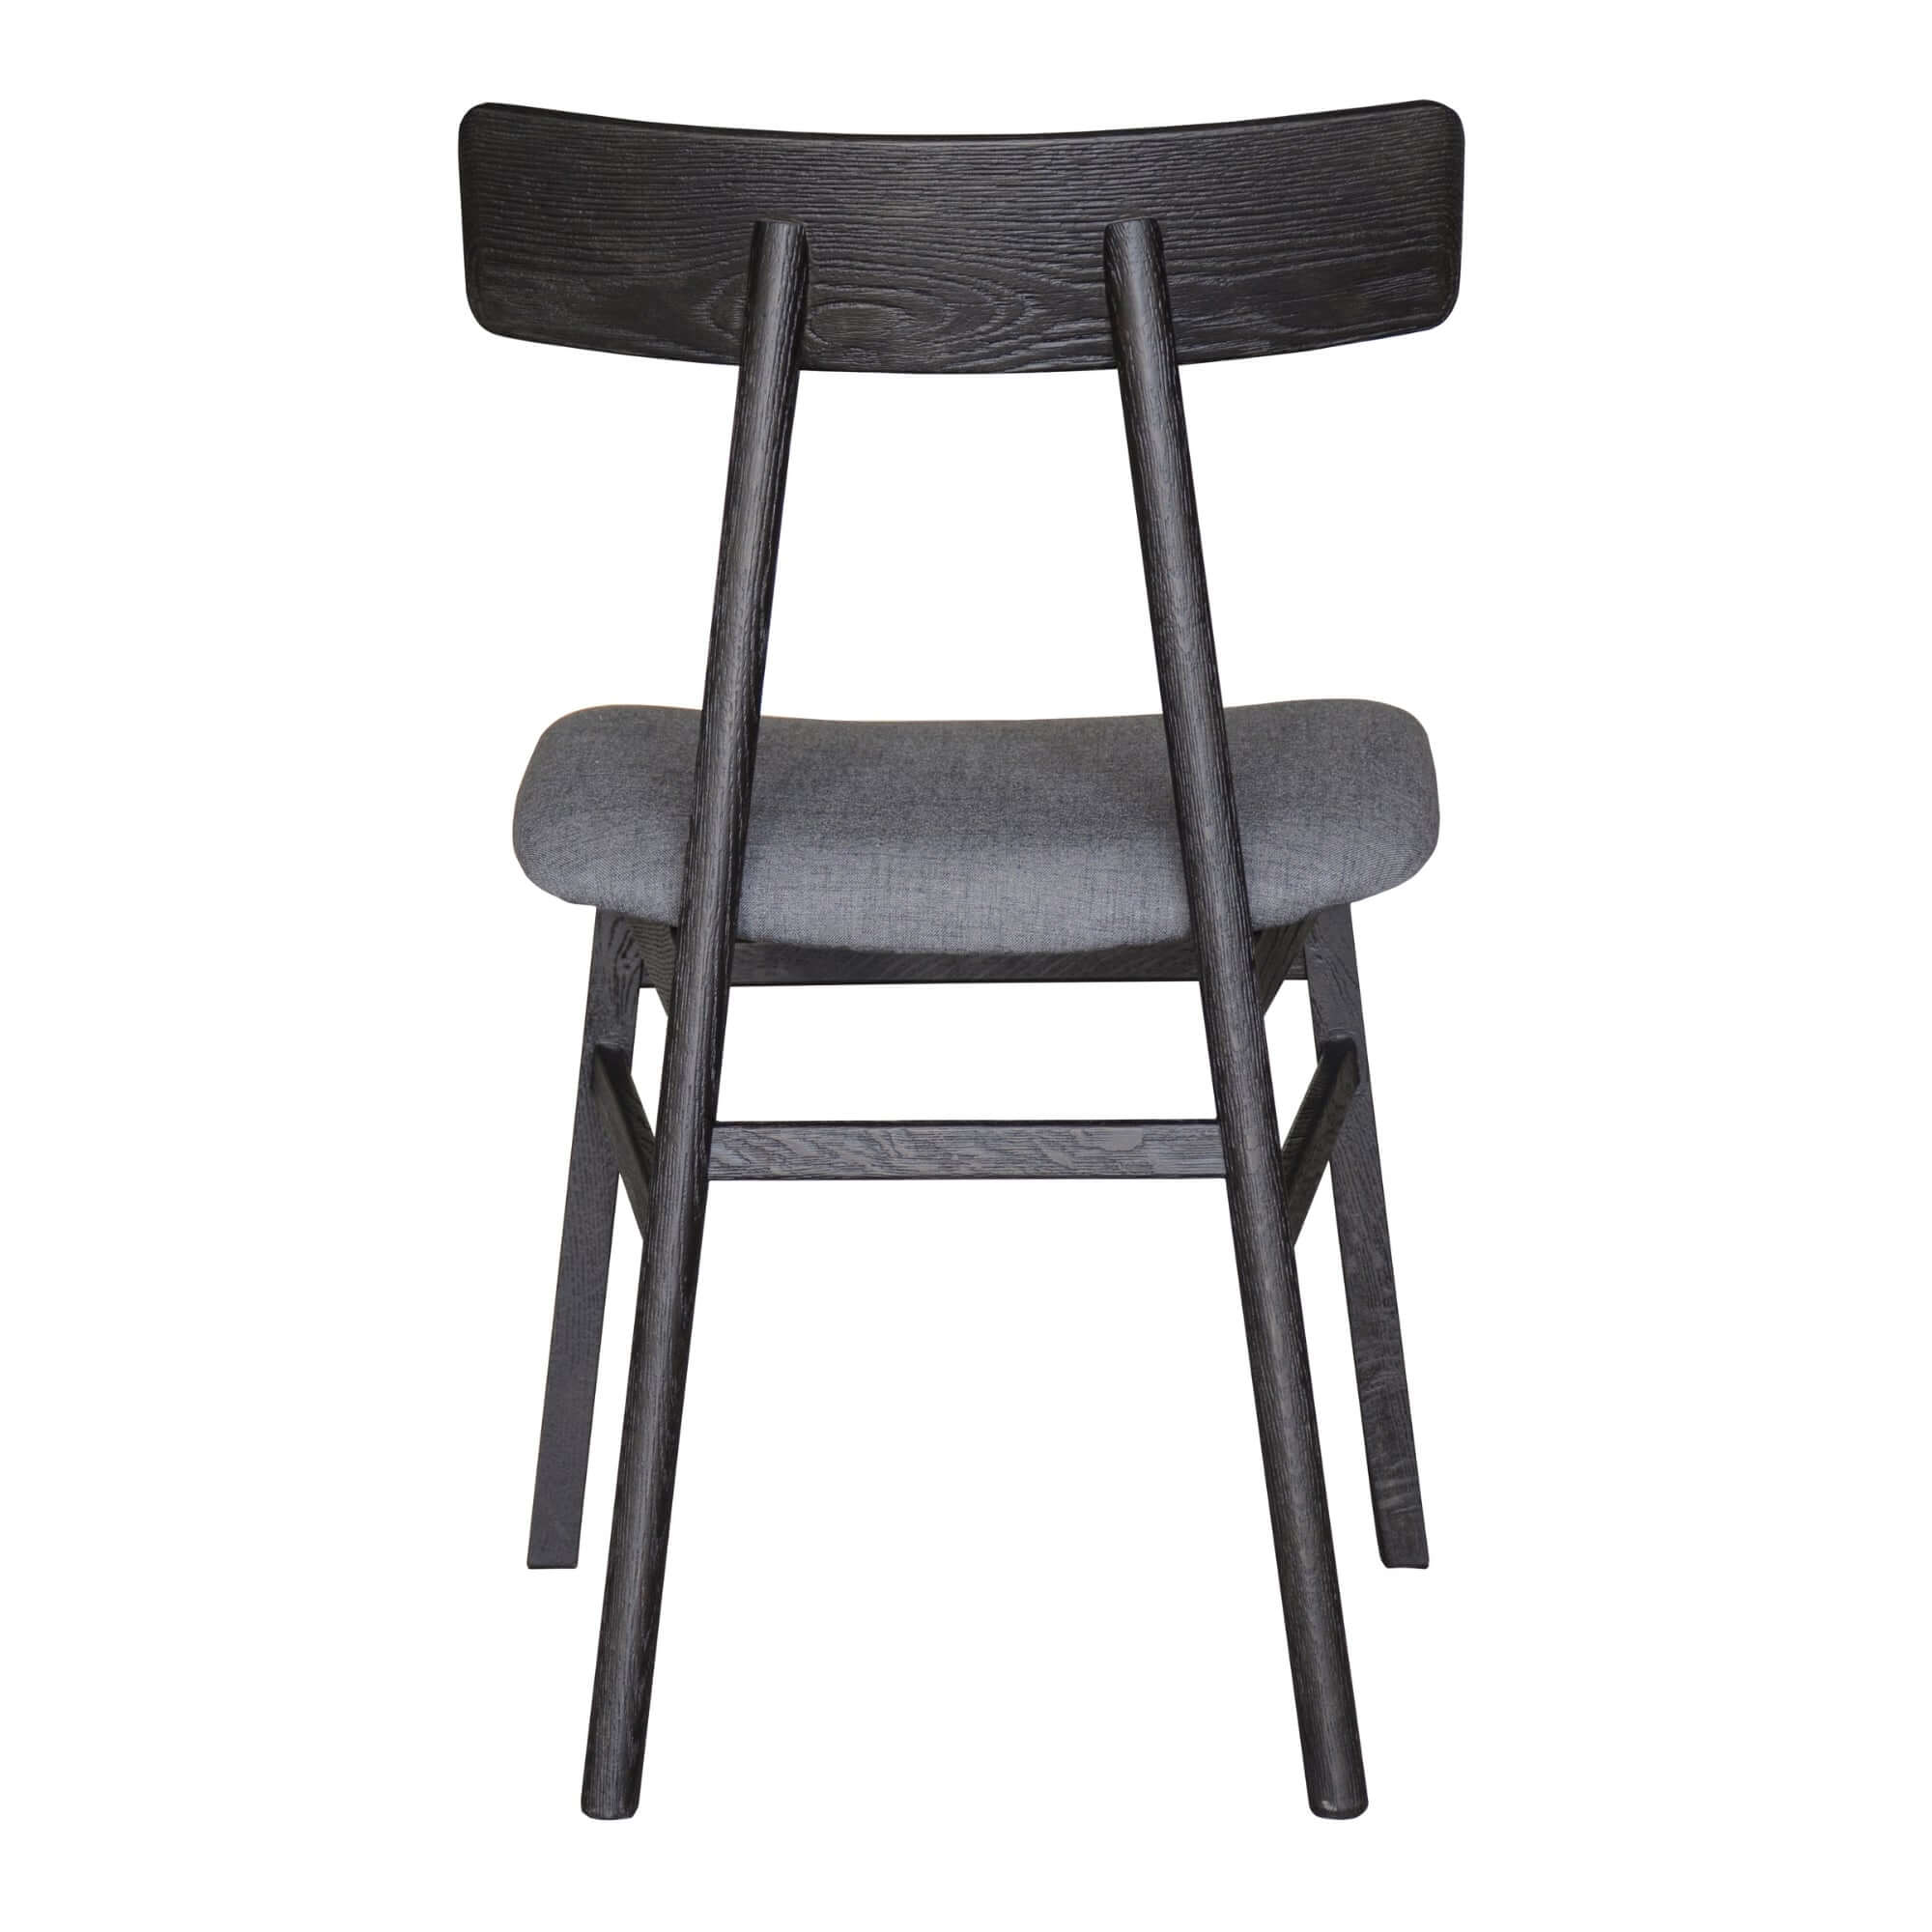 Claire Oak Dining Chairs (6-Piece Set) - Black Fabric-Upinteriors